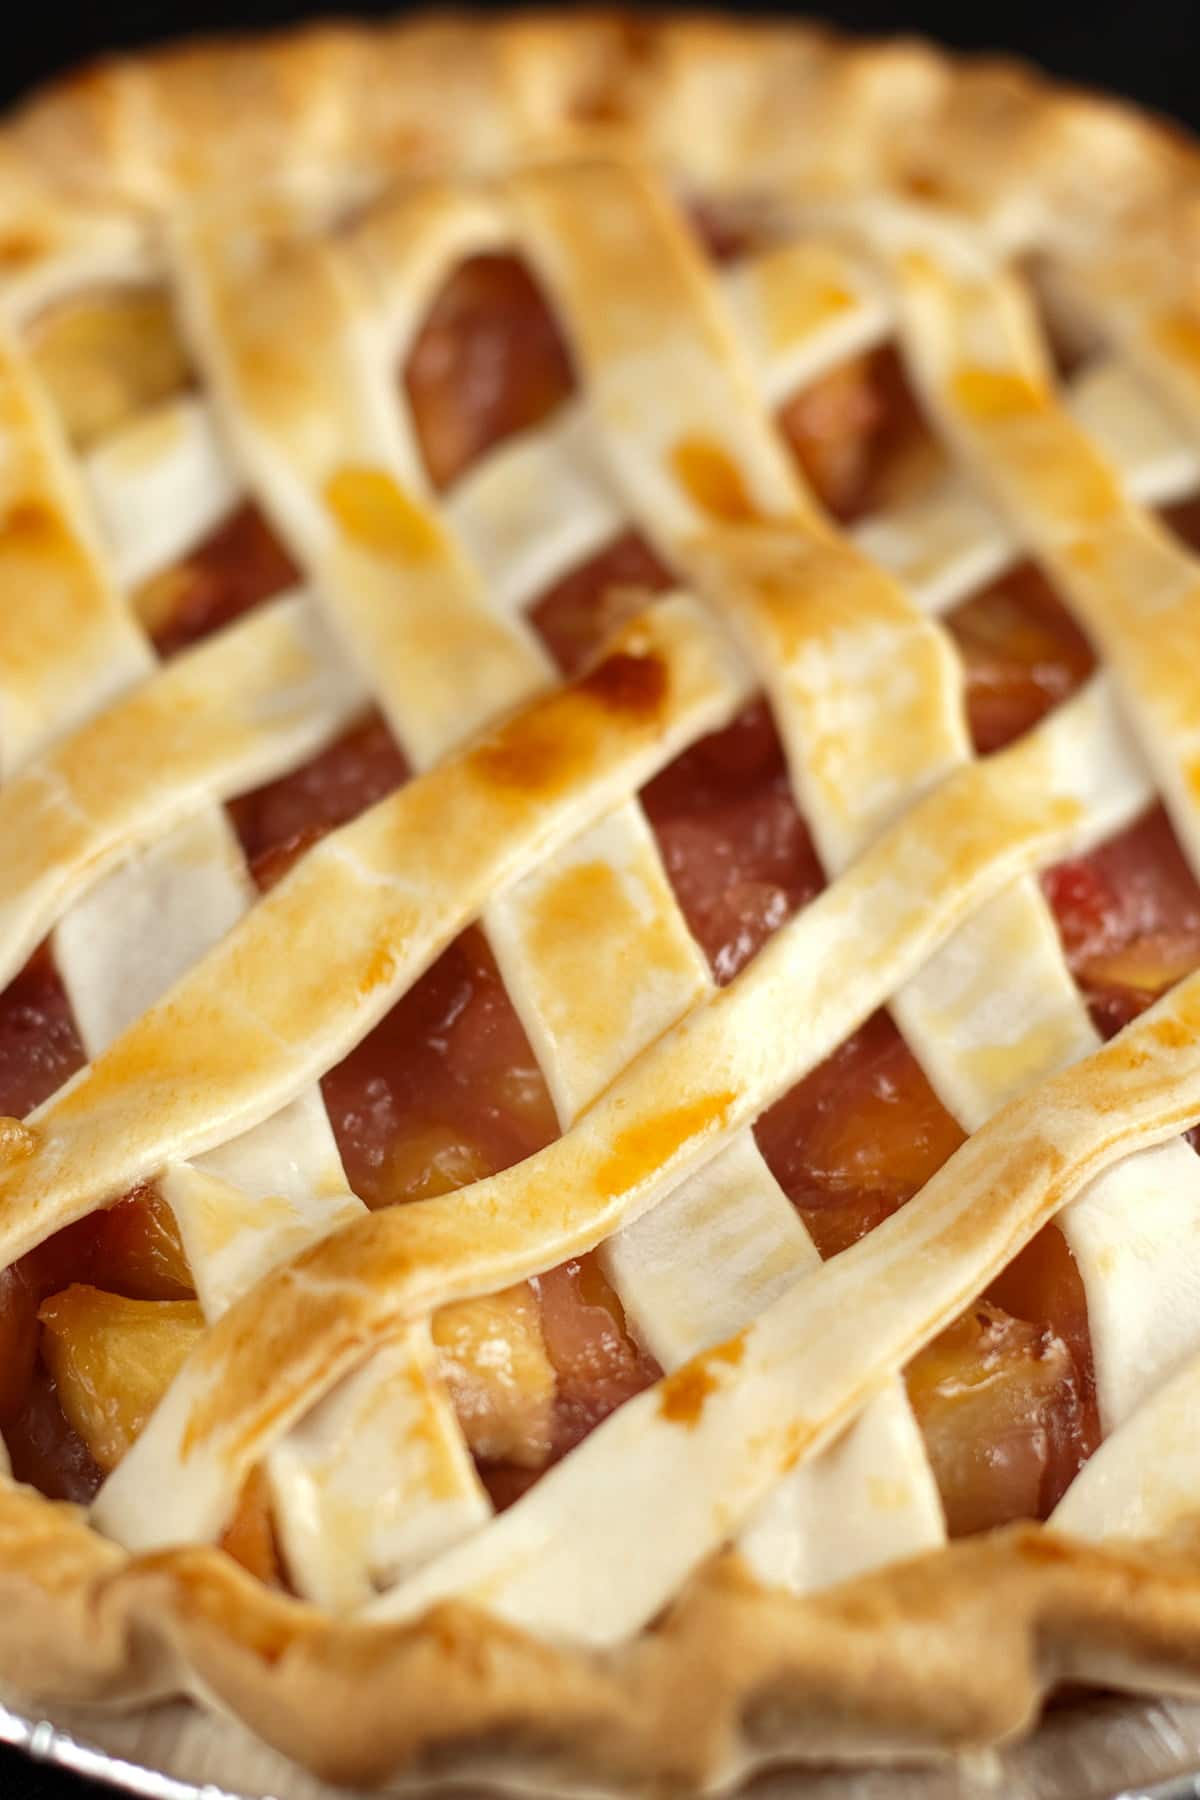 A peach pie with lattice style crust is shown against a black background.